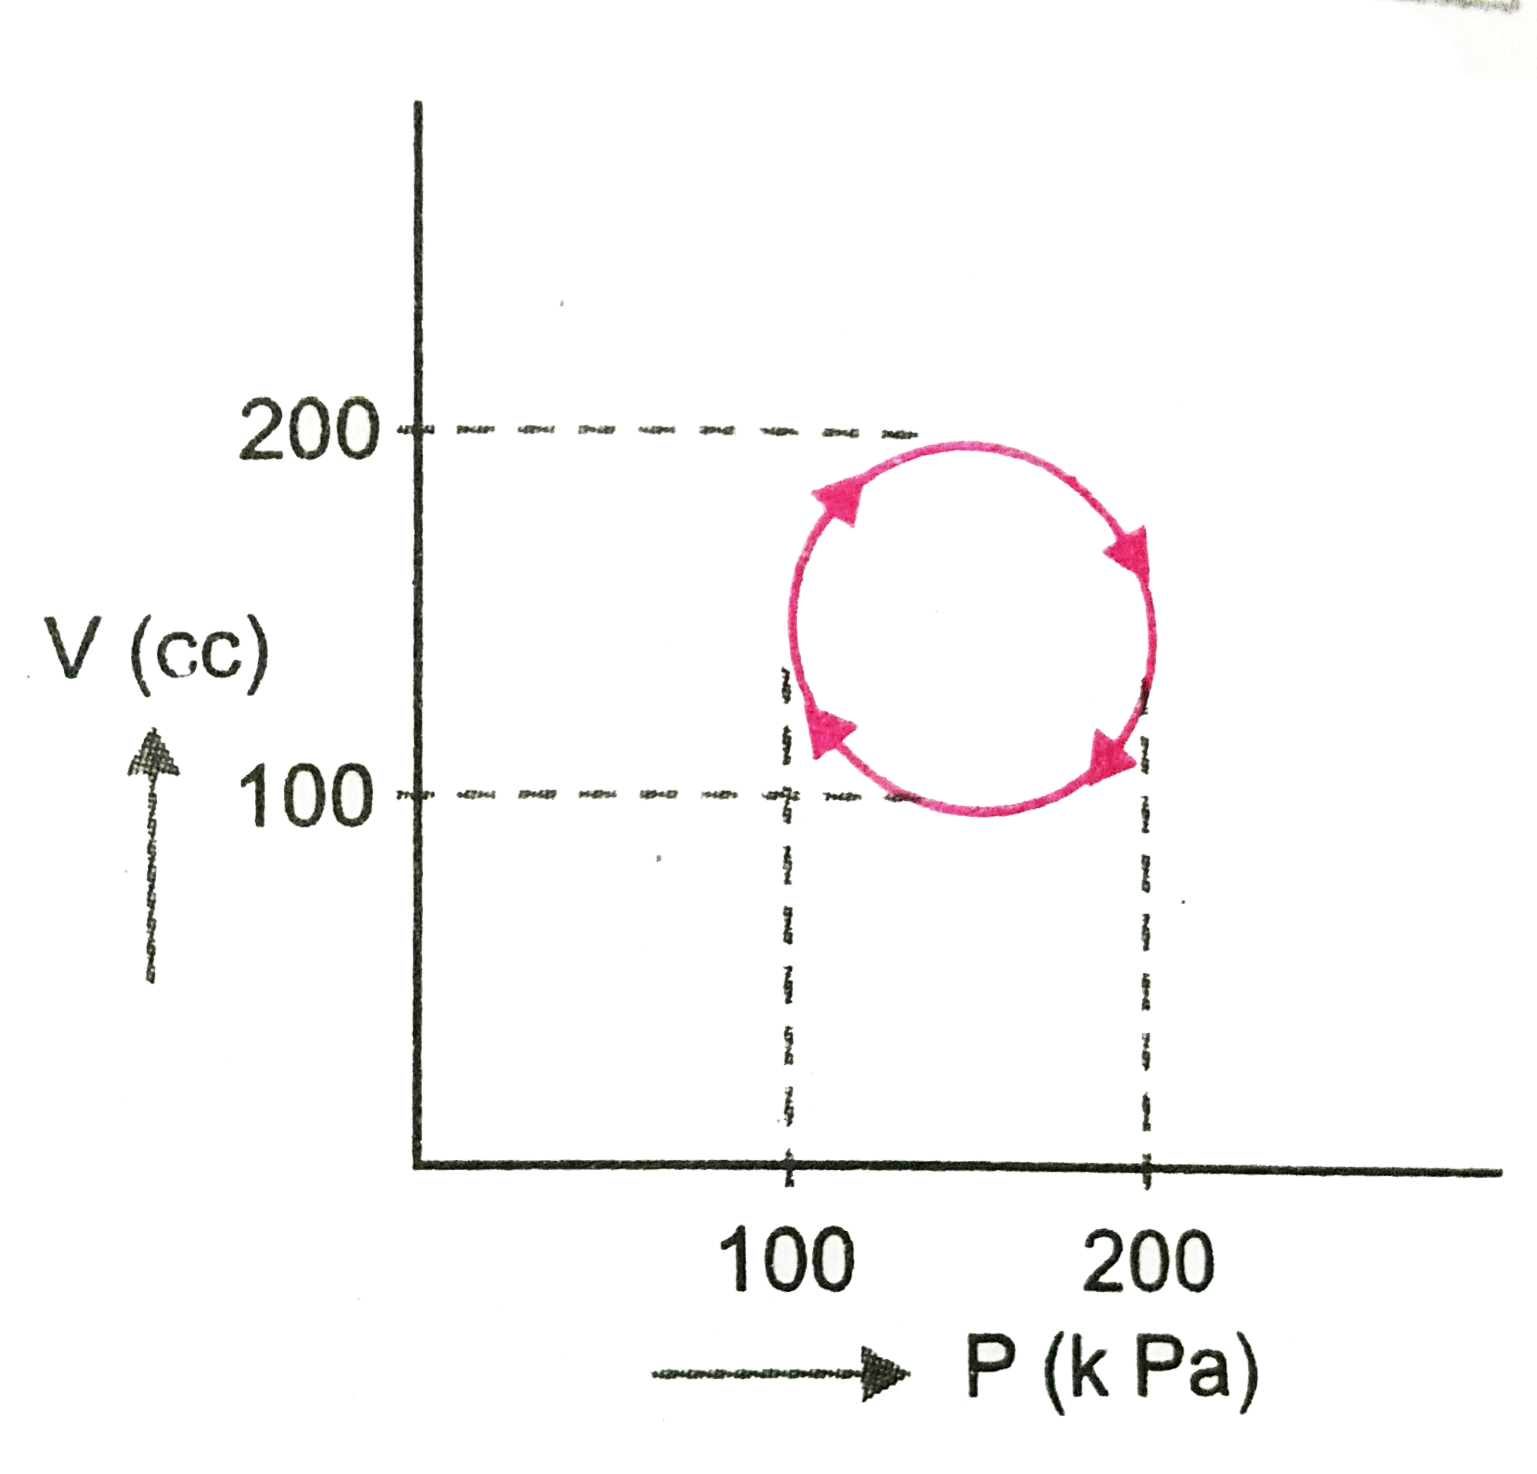 Calculate heat (in joule) absorbed by a system going once through the cyclic process shoen in (figure)